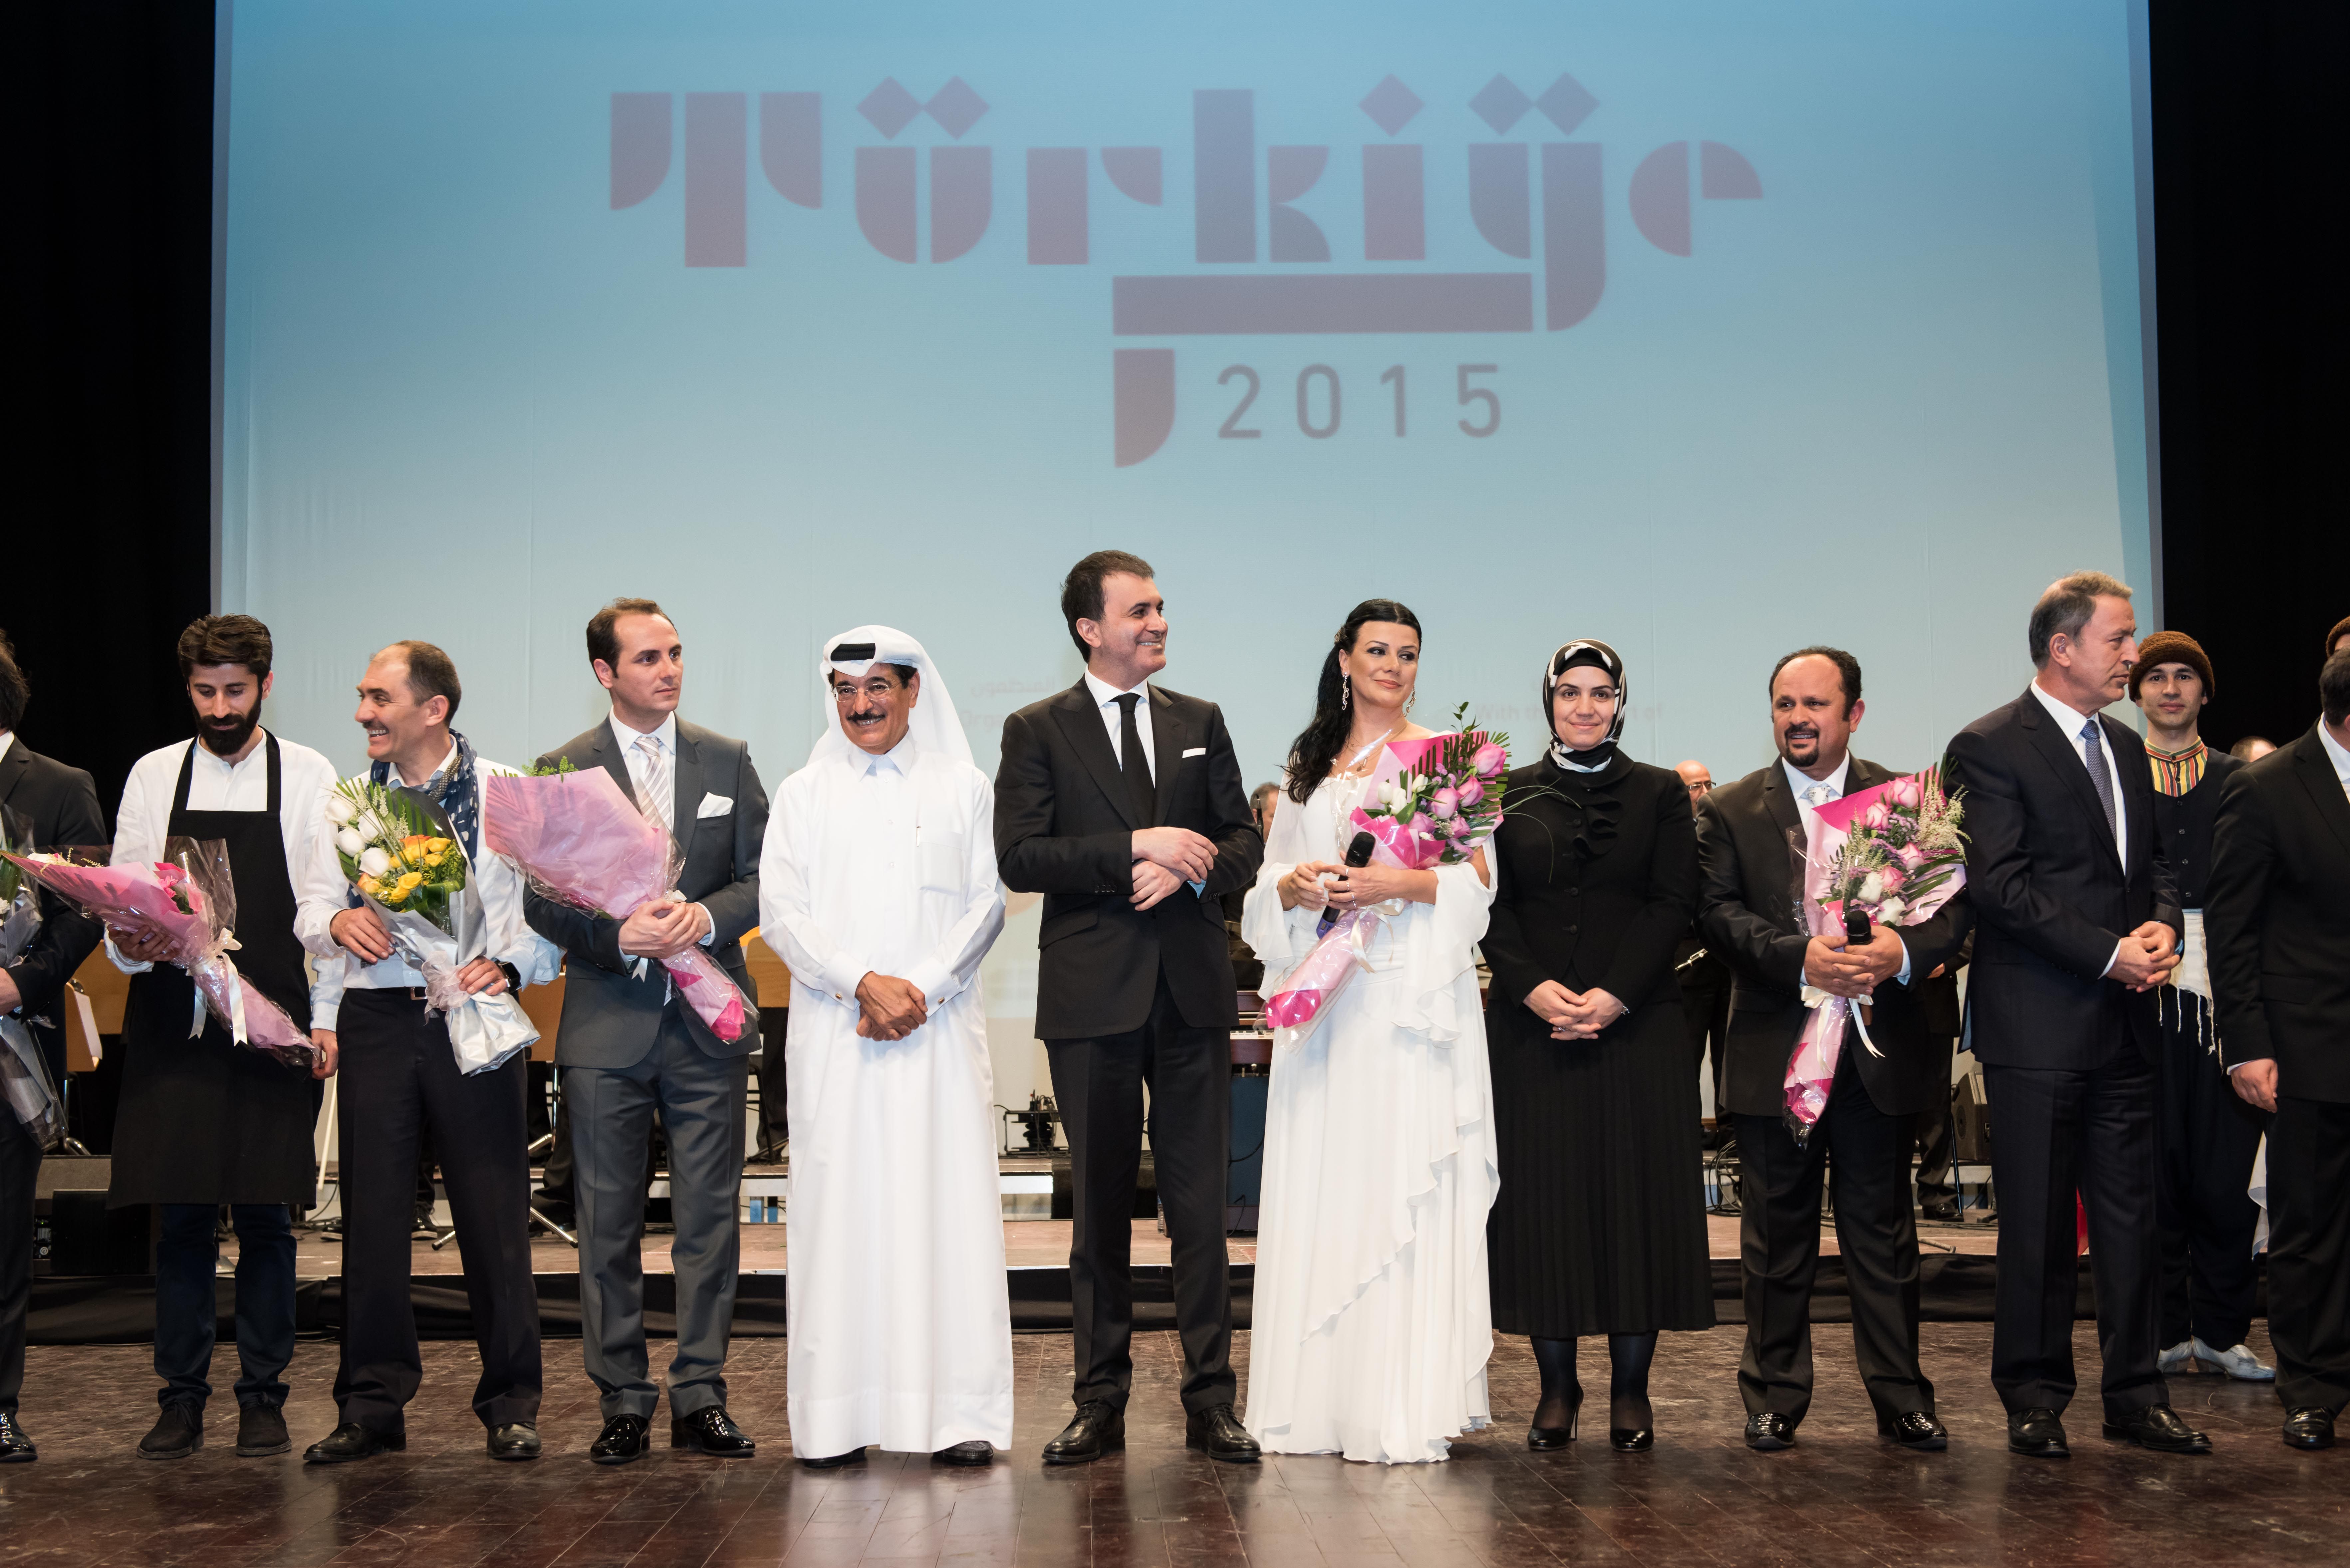 Important officials stand on stage and receive flowers during the opening ceremony for the Qatar-Turkey 2015 Year of Culture.